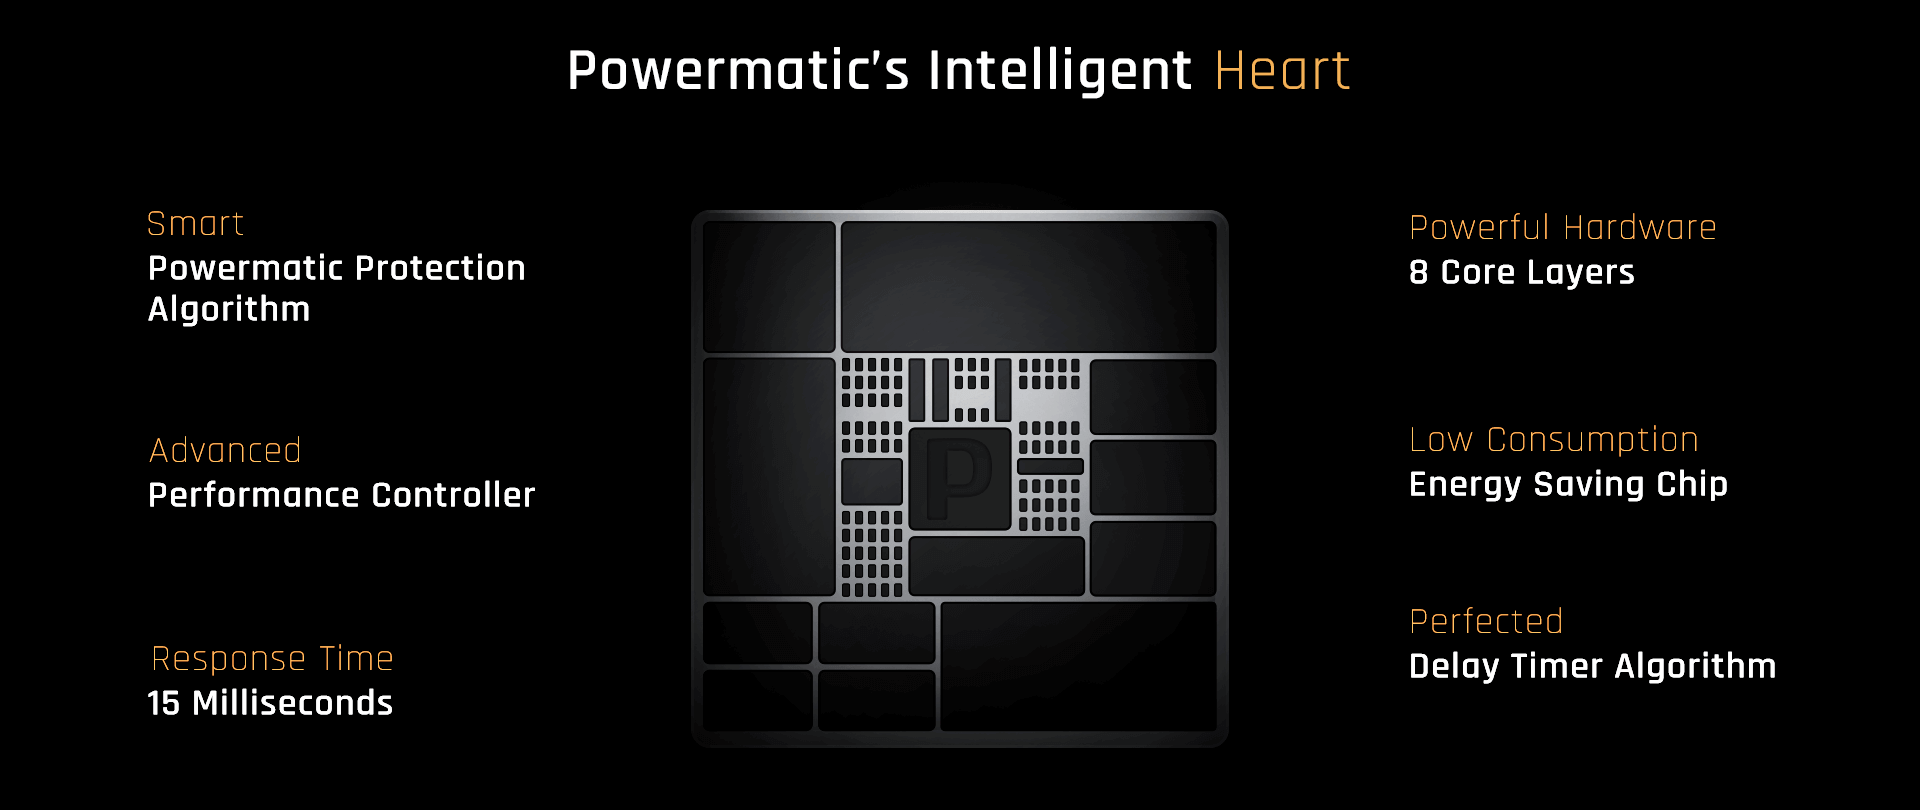 Within every Powermatic device there’s an intelligent heart that sets the pace. Makes Powermatic run smarter than any other power protection device. The intelligent heart is Powermatic dedicated smart microprocessor with its advanced proformas chip, which holds Powermatic smart Power protection algorithm and quick response time of 15 milliseconds and a powerful 8 core layer chip and energy saving and smart delay timer.